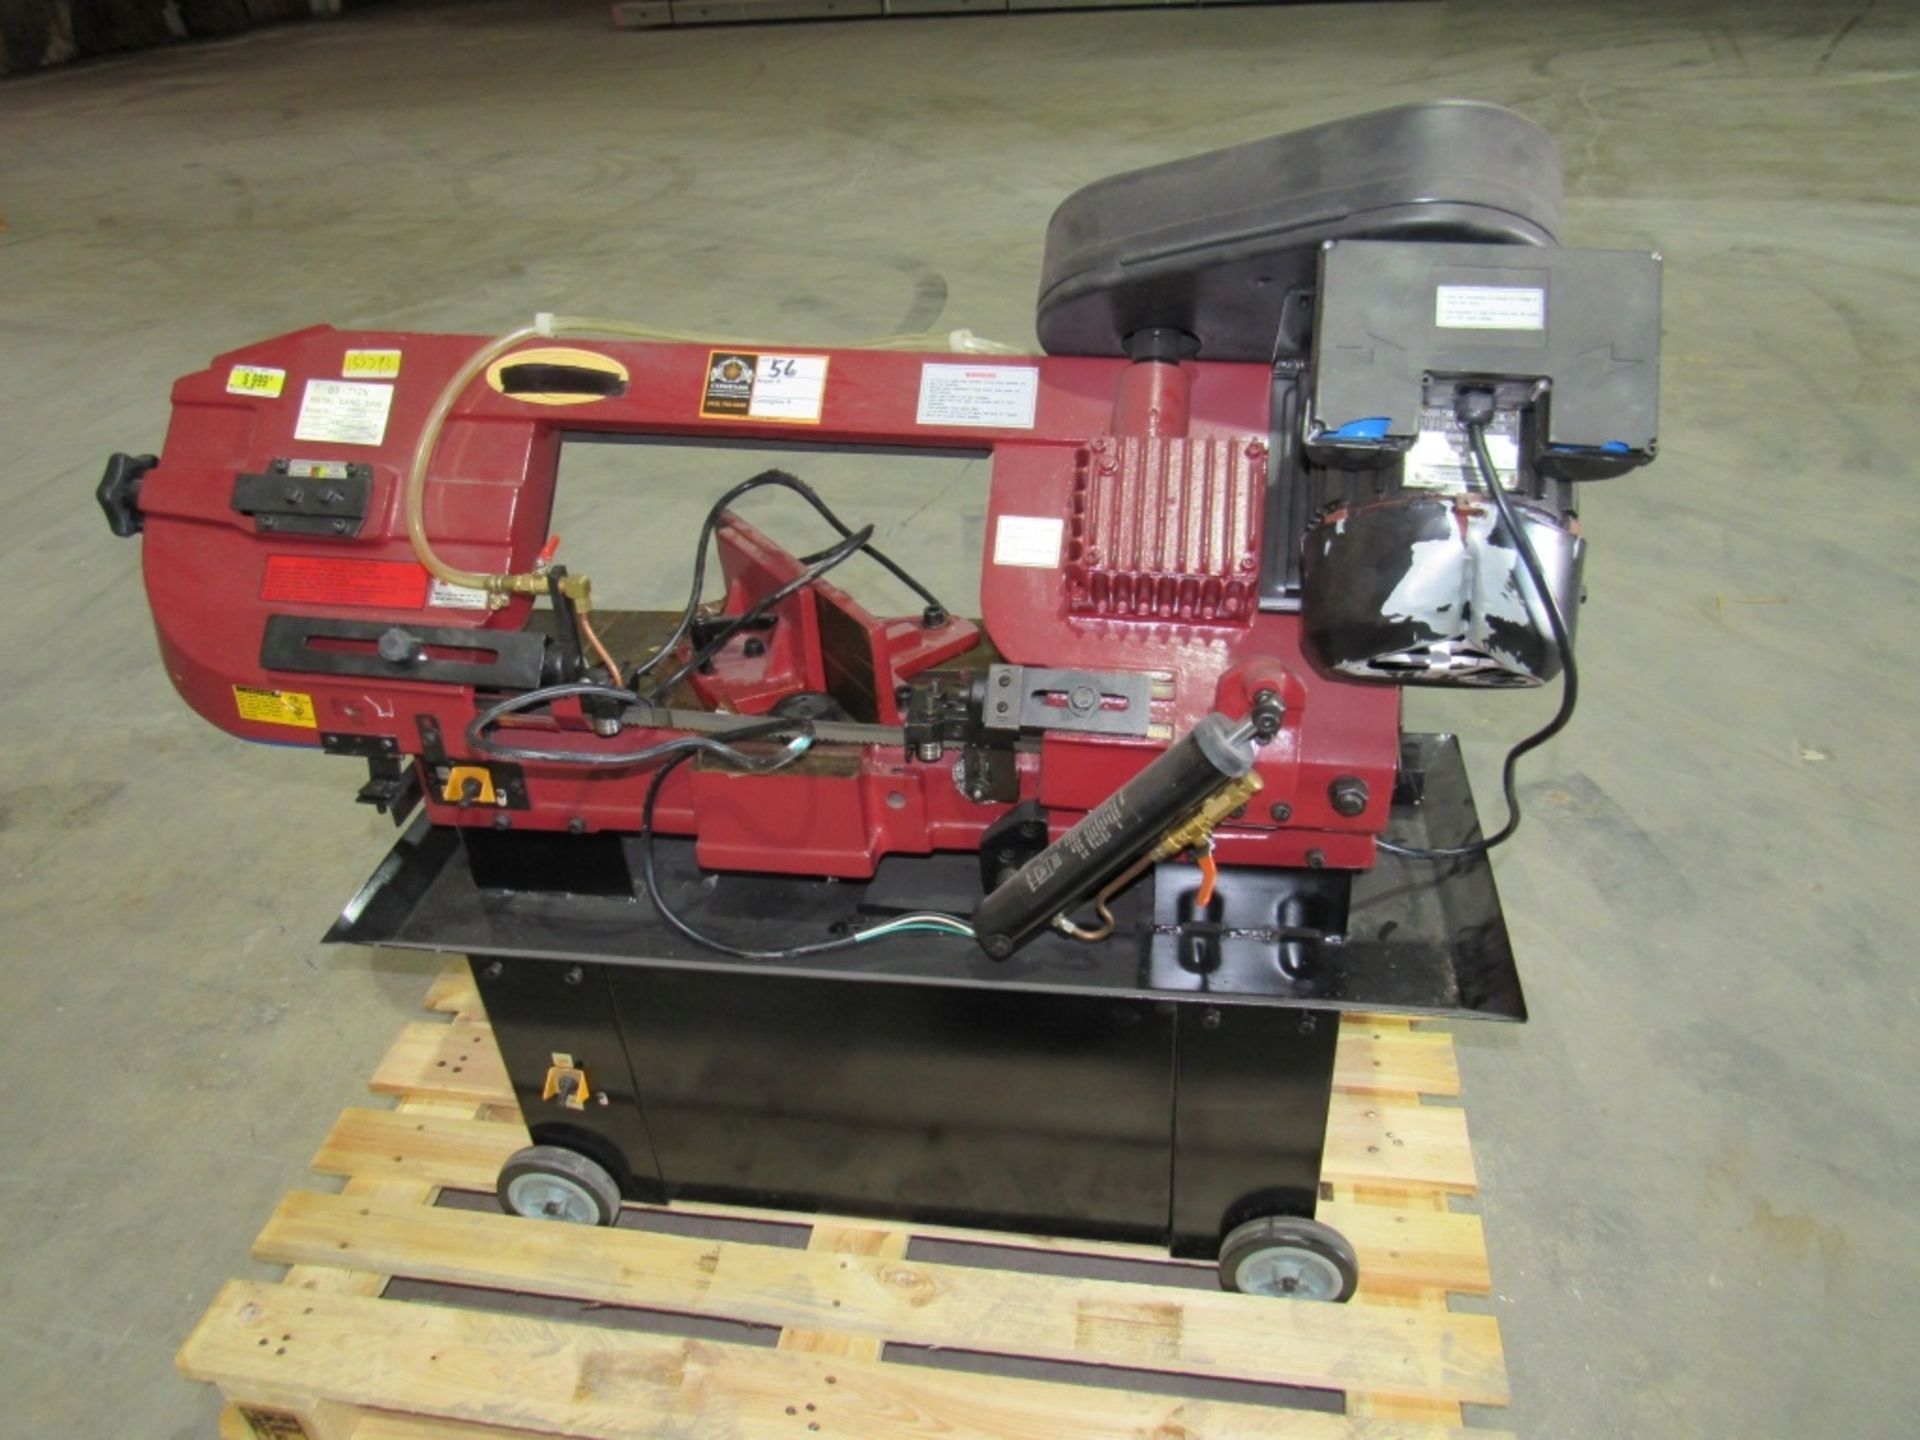 Metal Band Saw- Model - BS-712N 1.1 KW 115/230 Volts 1 Phase 60 Hz Overall Dimensions - 4' x 16" x